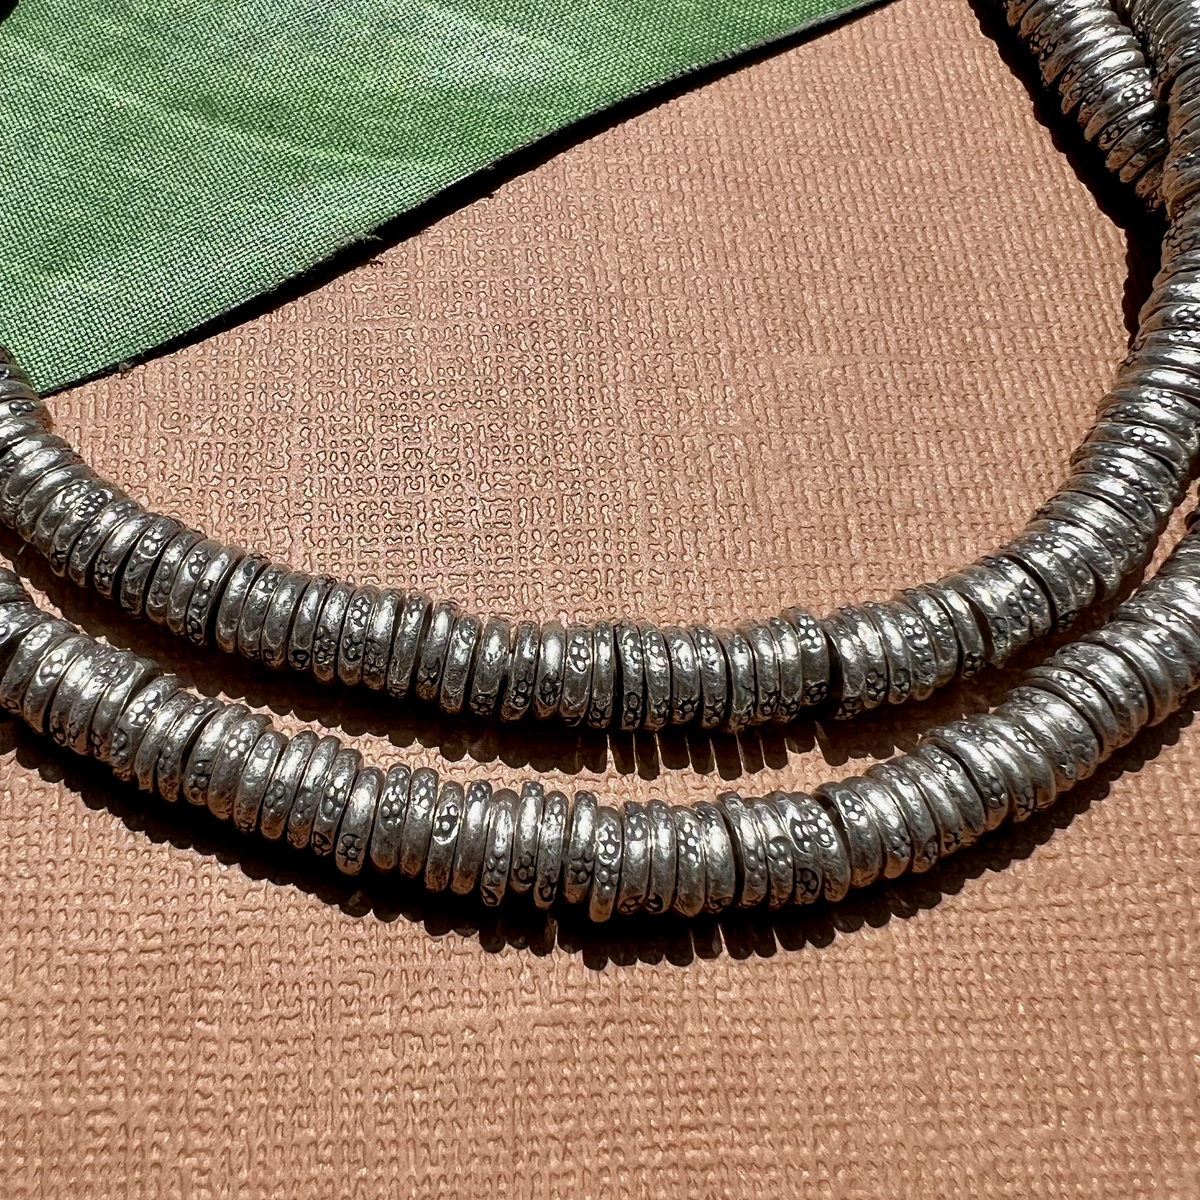 Hill Tribe Silver Bead Caps – Bead Goes On